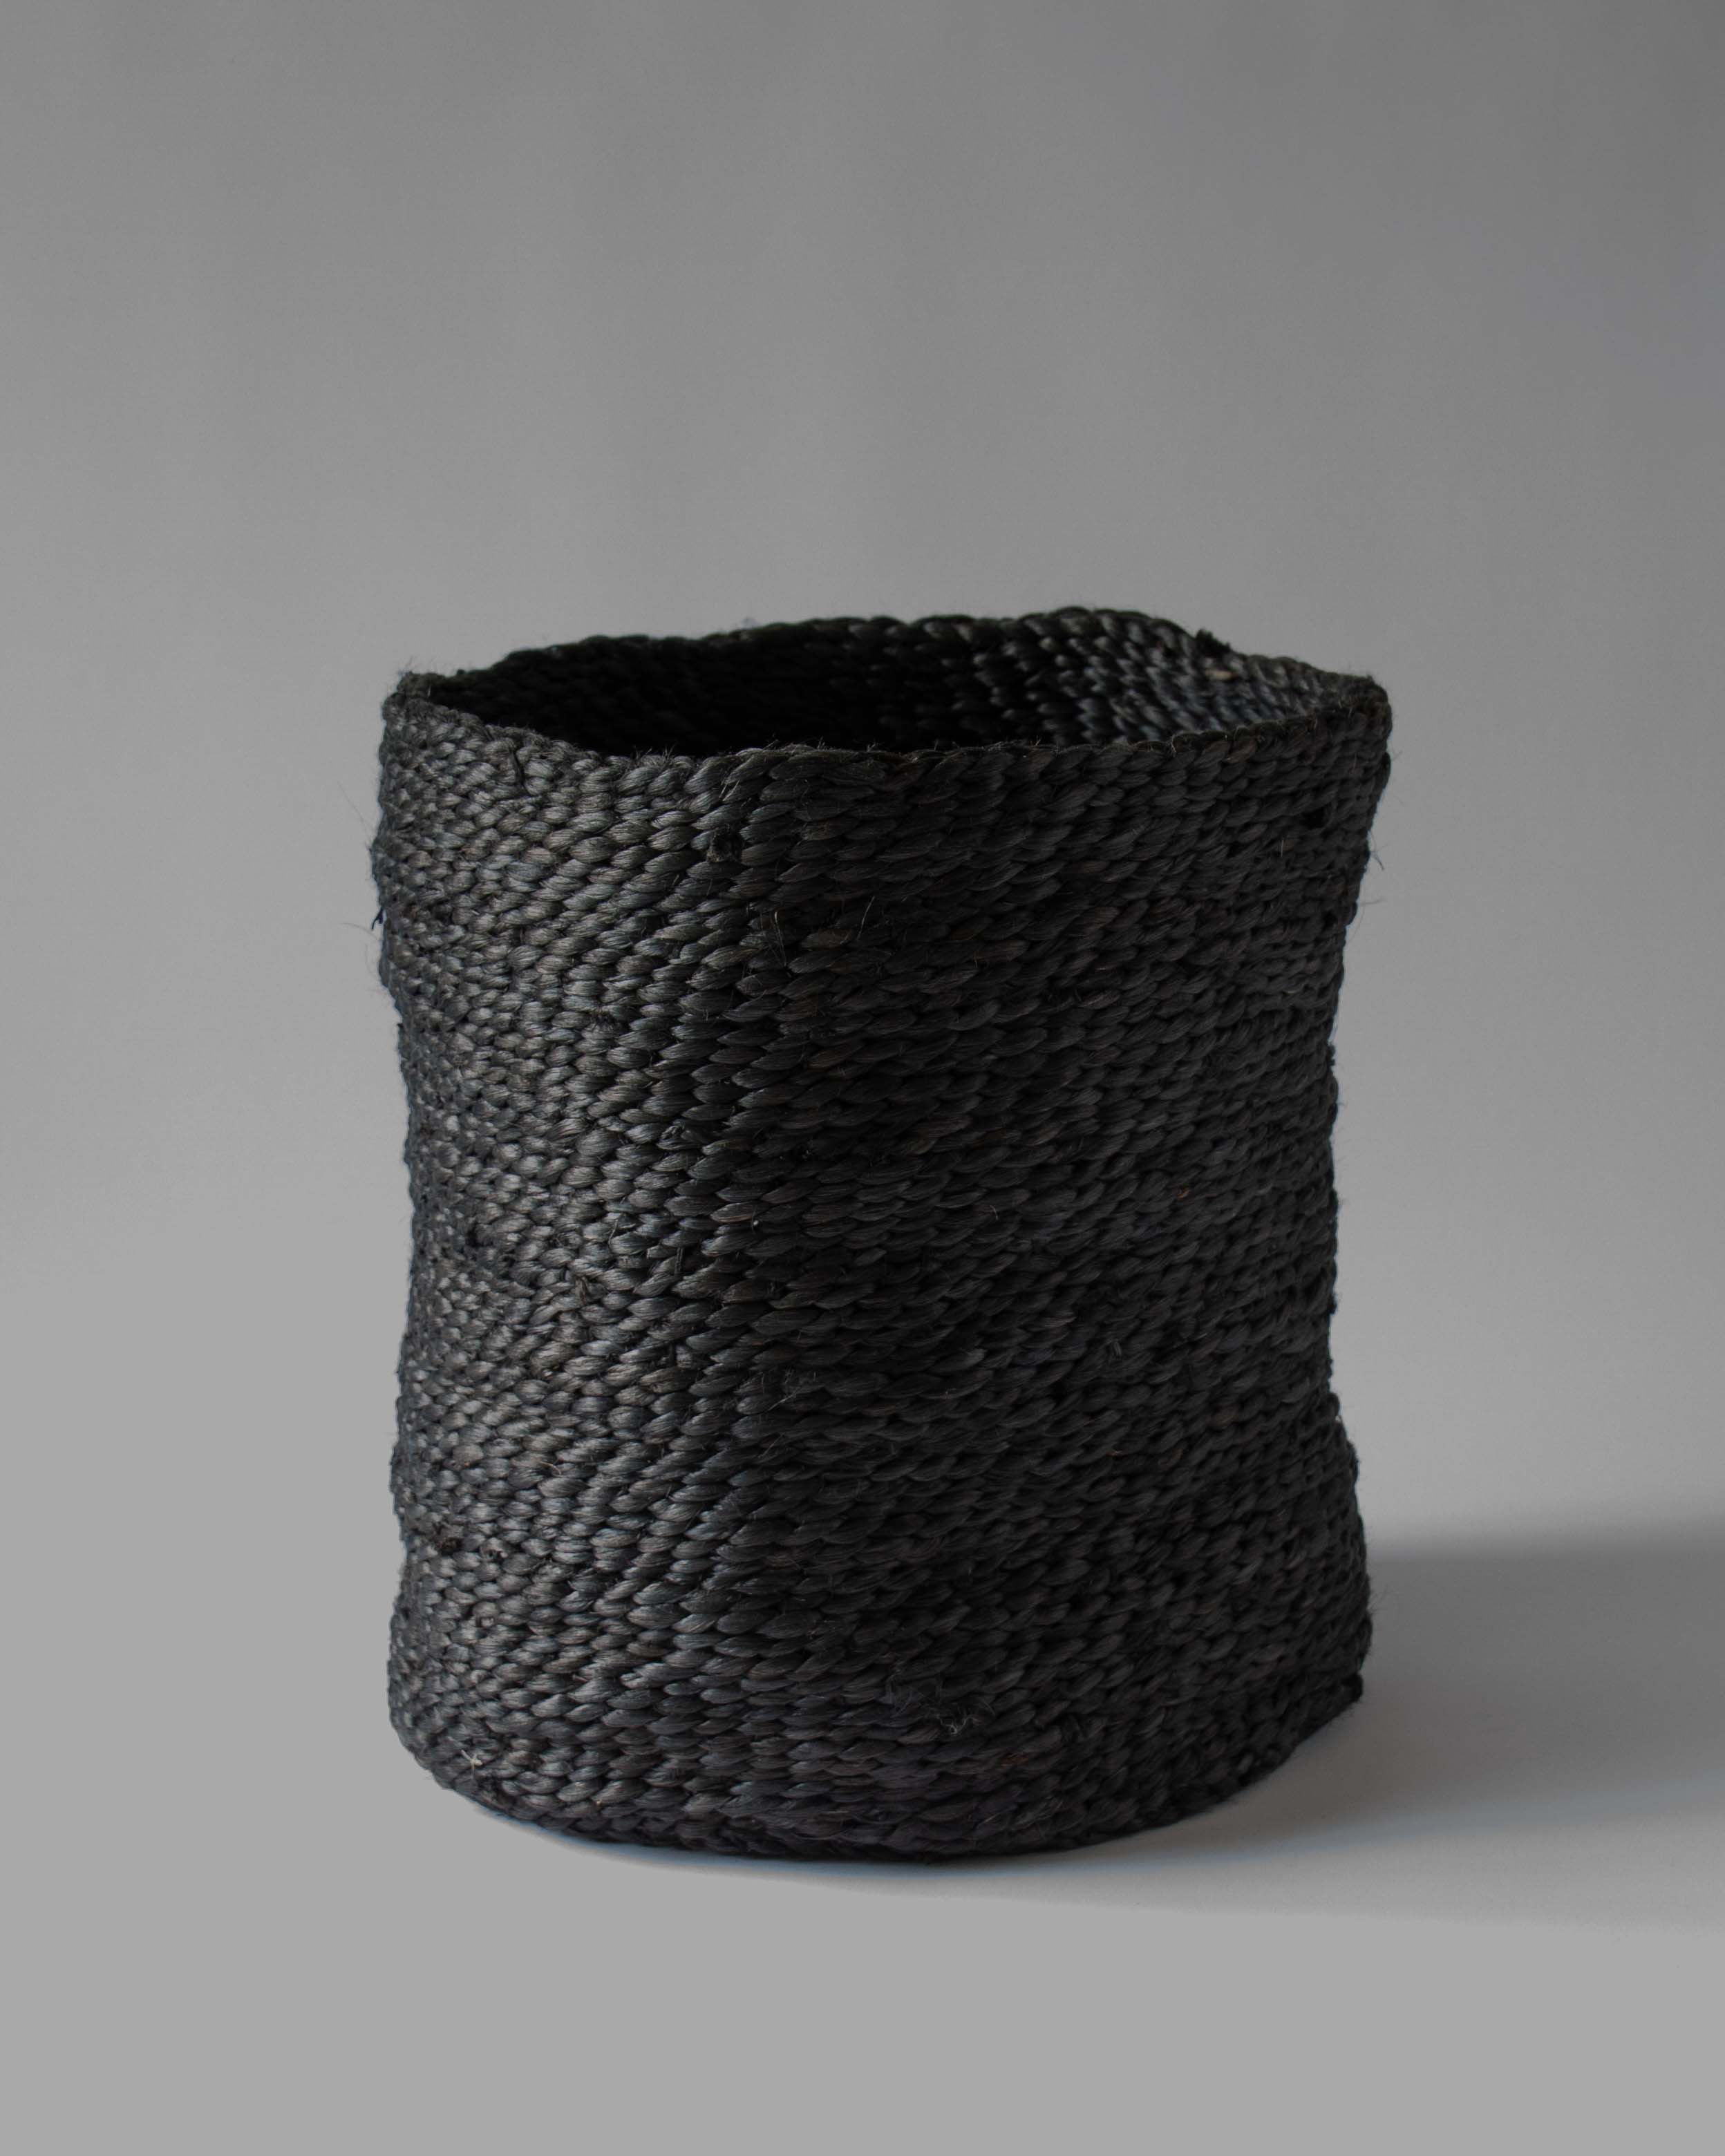 Emerson Waste Paper Basket - Charcoal